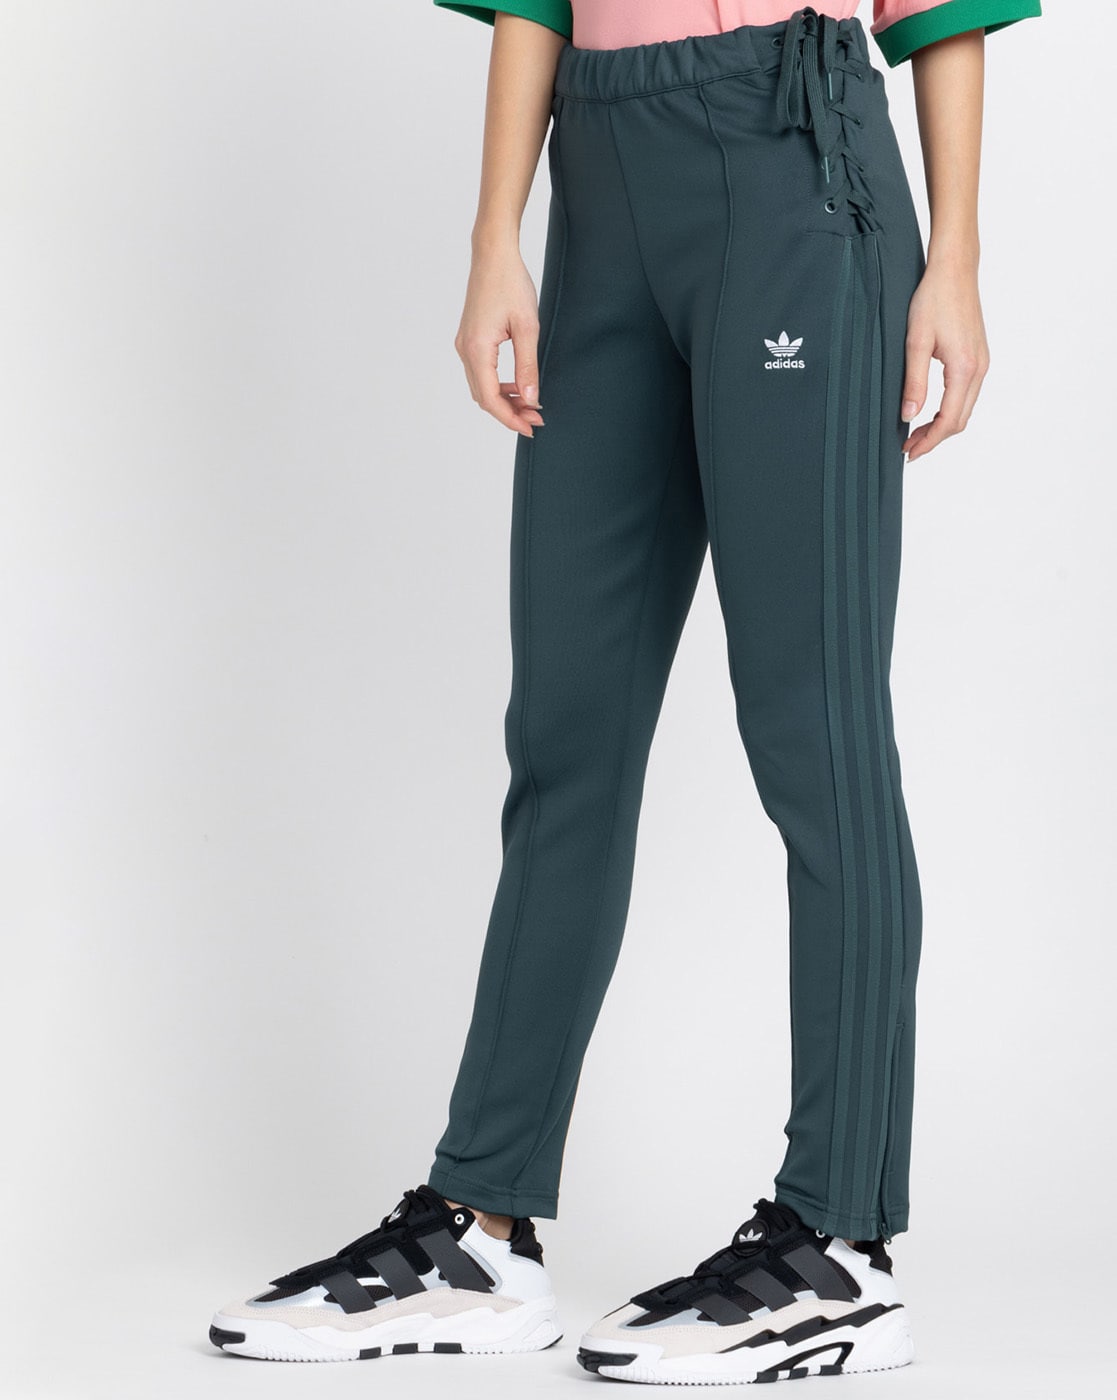 Adidas Originals - Wales Bonner Track Suit Pants | HBX - Globally Curated  Fashion and Lifestyle by Hypebeast